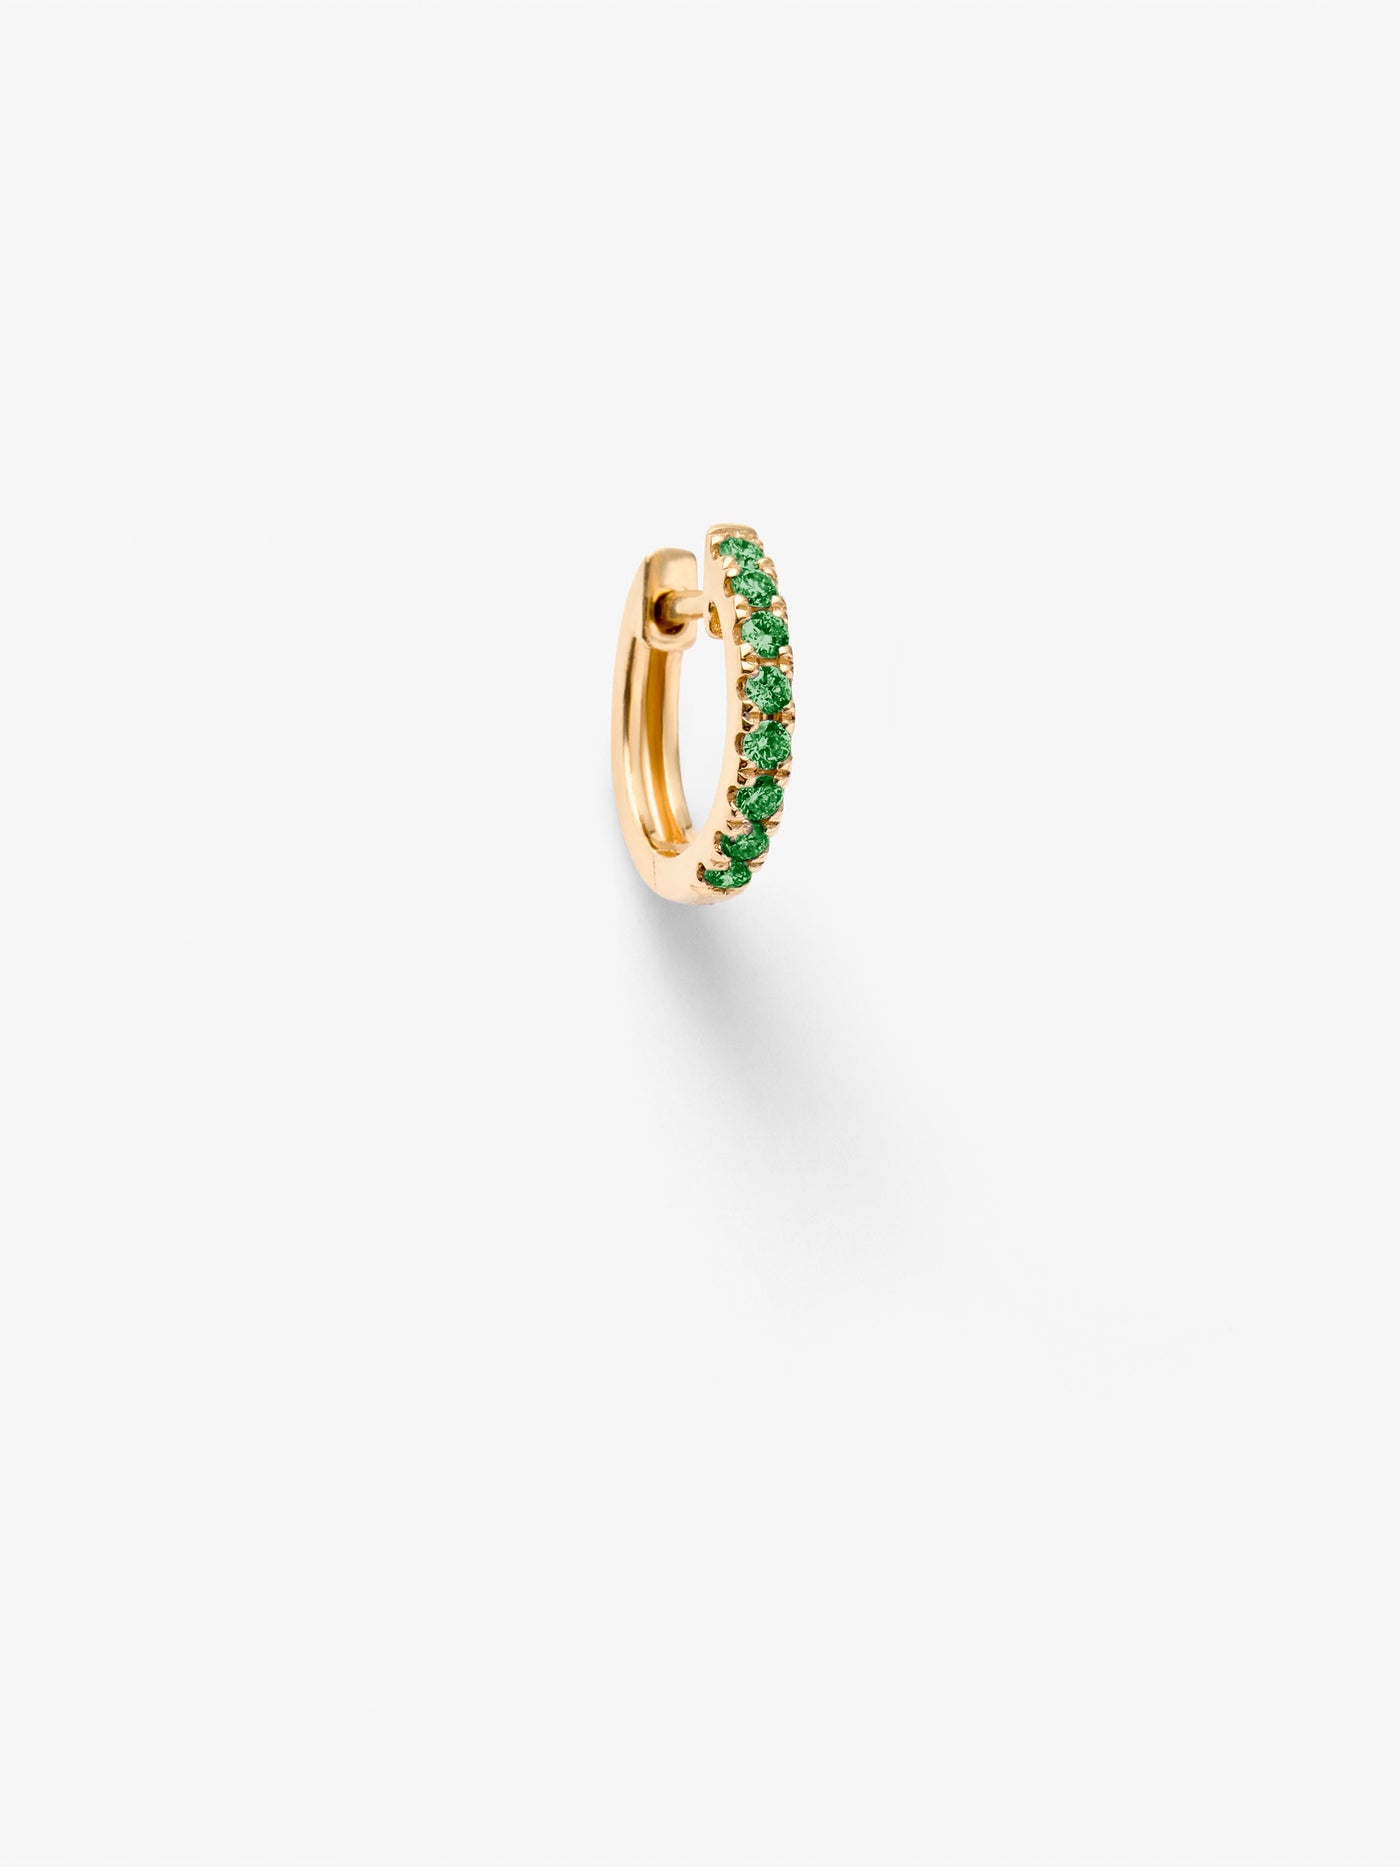 Single huggie tsavorite earring in 18k solid yellow gold, are hinged for easy on and off.